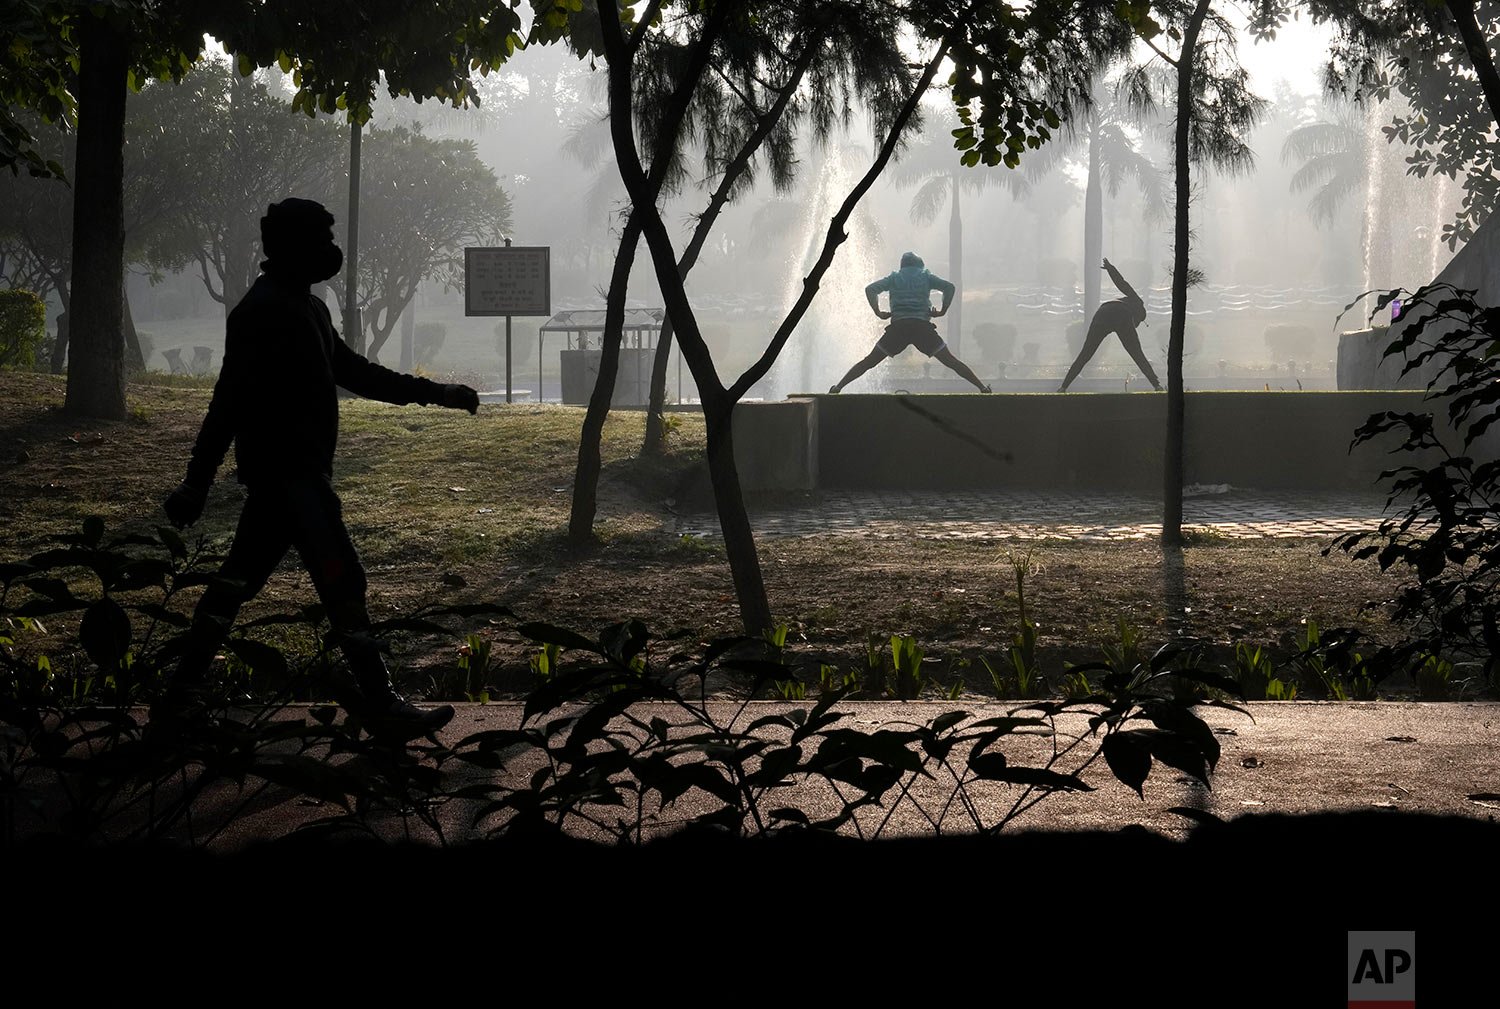  A man walks wearing a facemark as a precaution against the coronavirus as others exercise in a park, in New Delhi, India, Tuesday, Jan. 11, 2022. (AP Photo/Manish Swarup) 